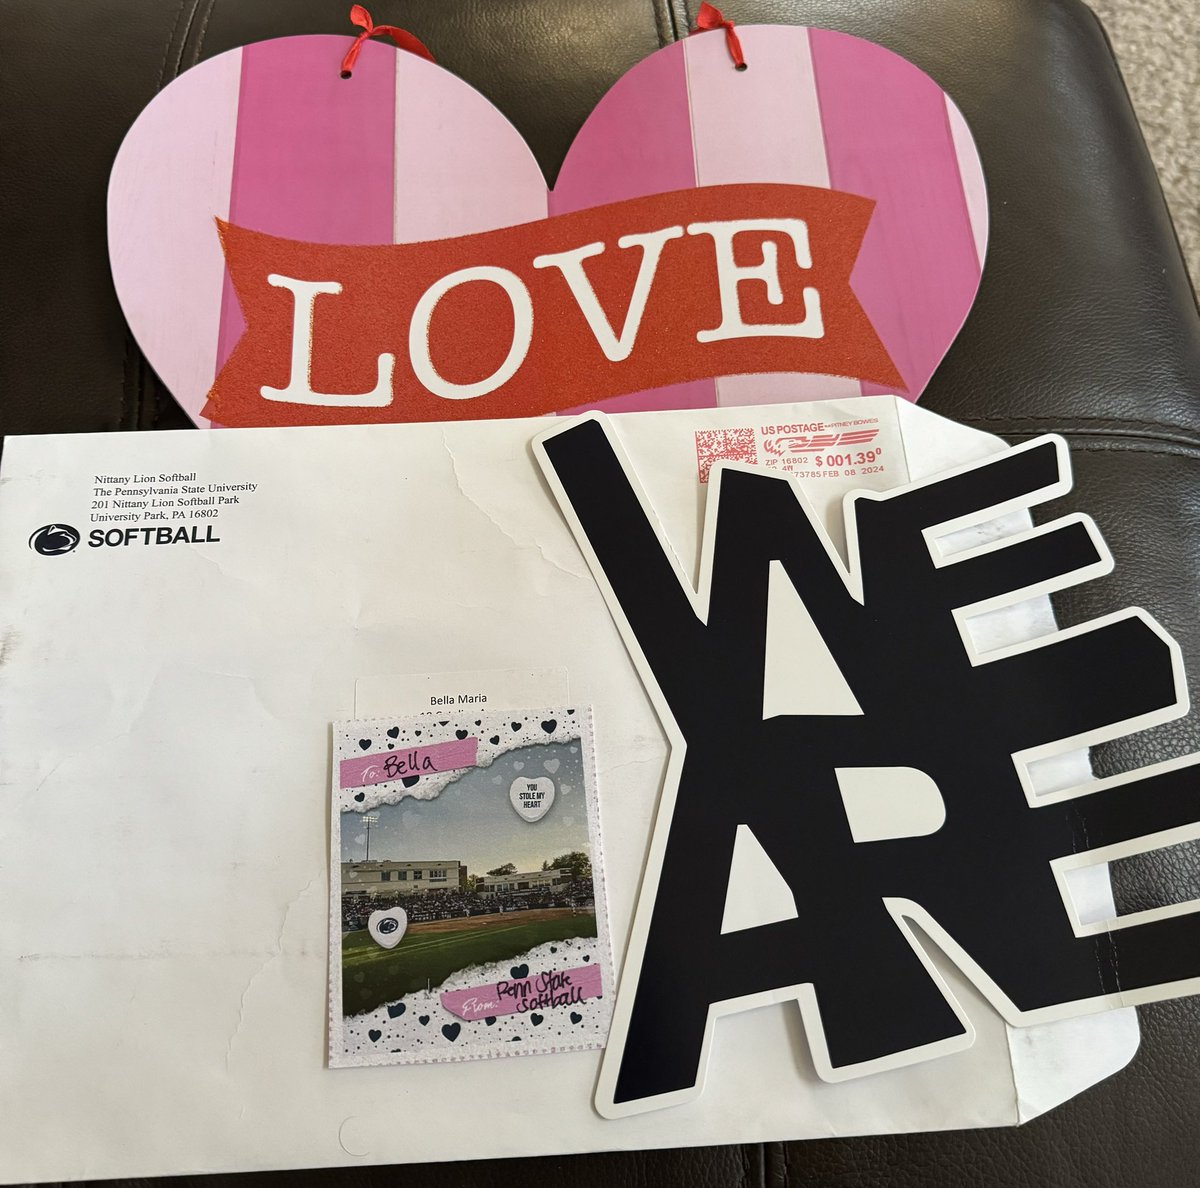 Valentine’s Day ❤️from @PennStateSB Always great hearing from you & A Great Start to your season going 5-0 !!! Well done!! #WeAre @coach_crowell @ABaggetta @lexxx_20 @mysha_sataraka @intensitykod @Intensity16uBOD @ExtraInningSB @LegacyLegendsS1